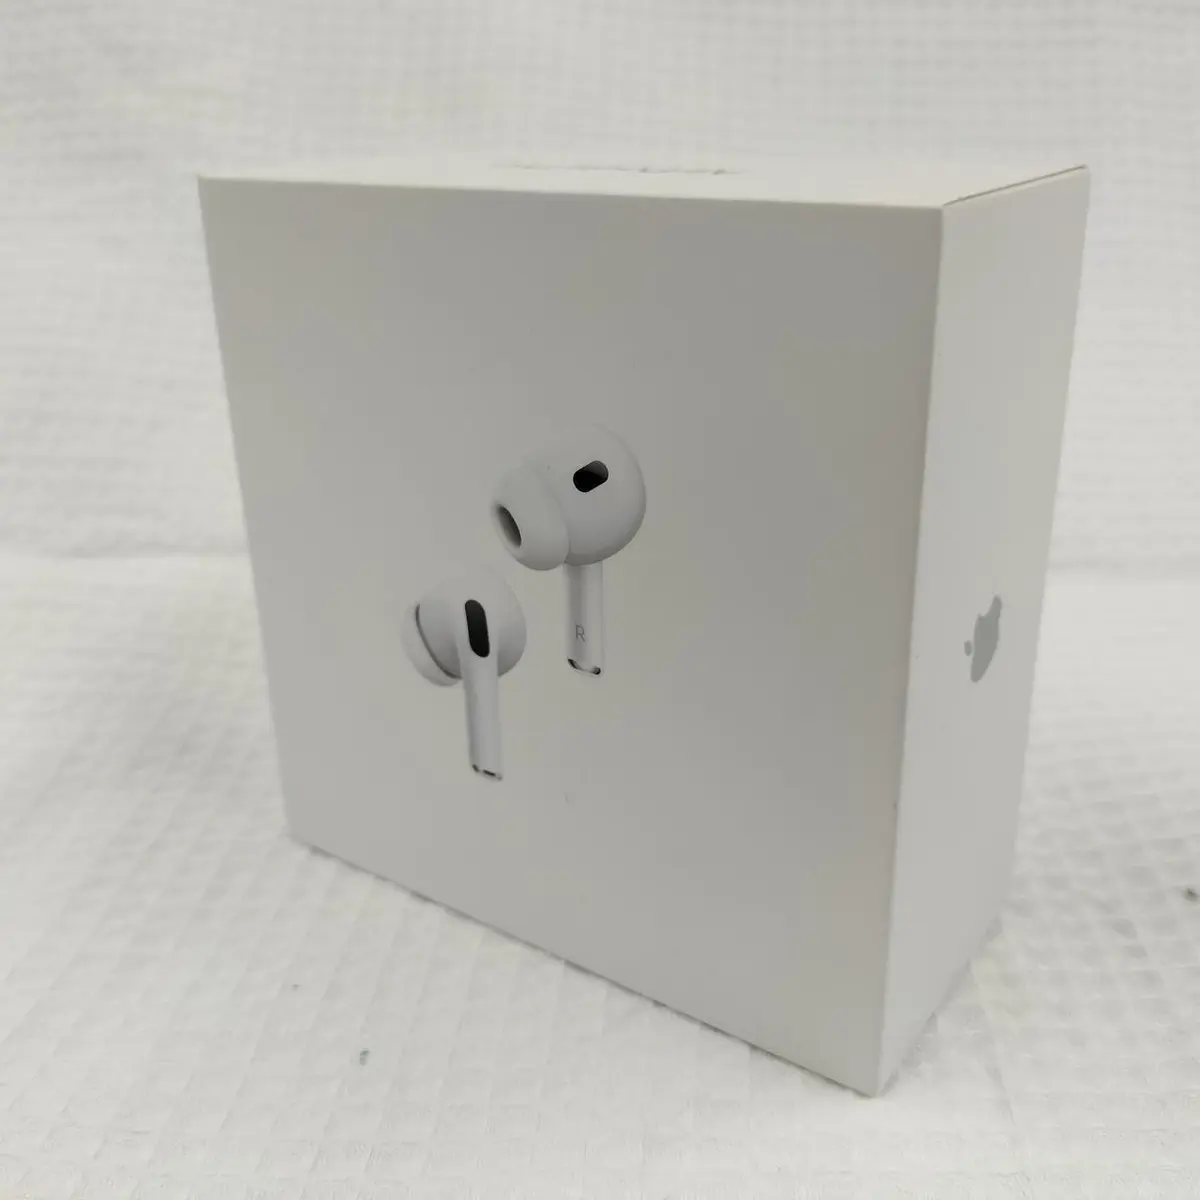 Apple MQD83J/A Airpods Pro 2nd Generation from Japan Box Included